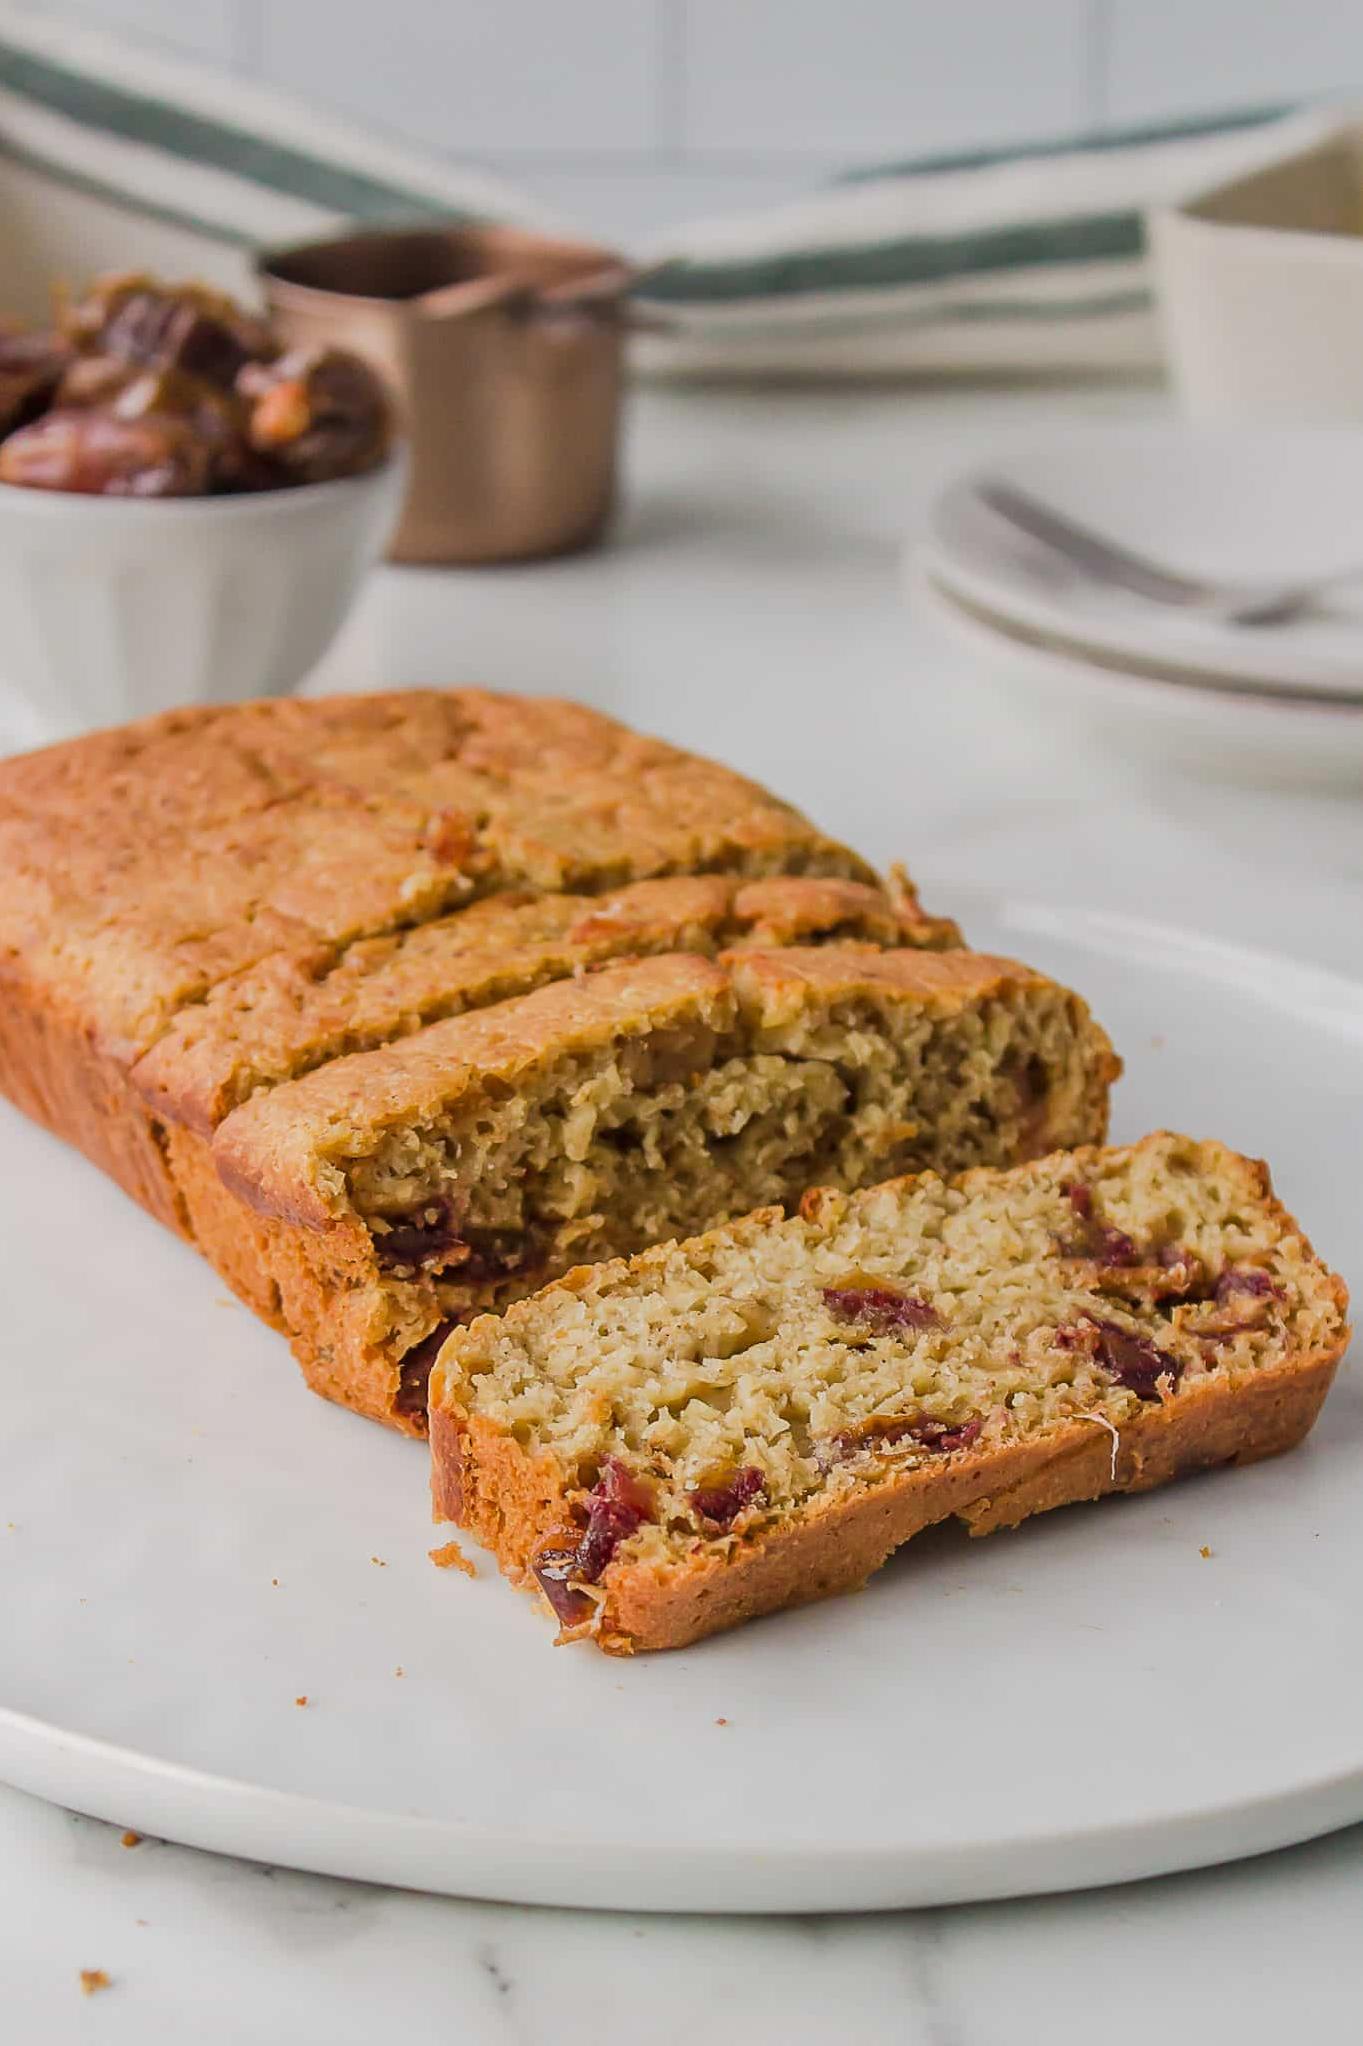  Not only is this loaf delicious, but it's also packed with nutrients and wholesome ingredients.